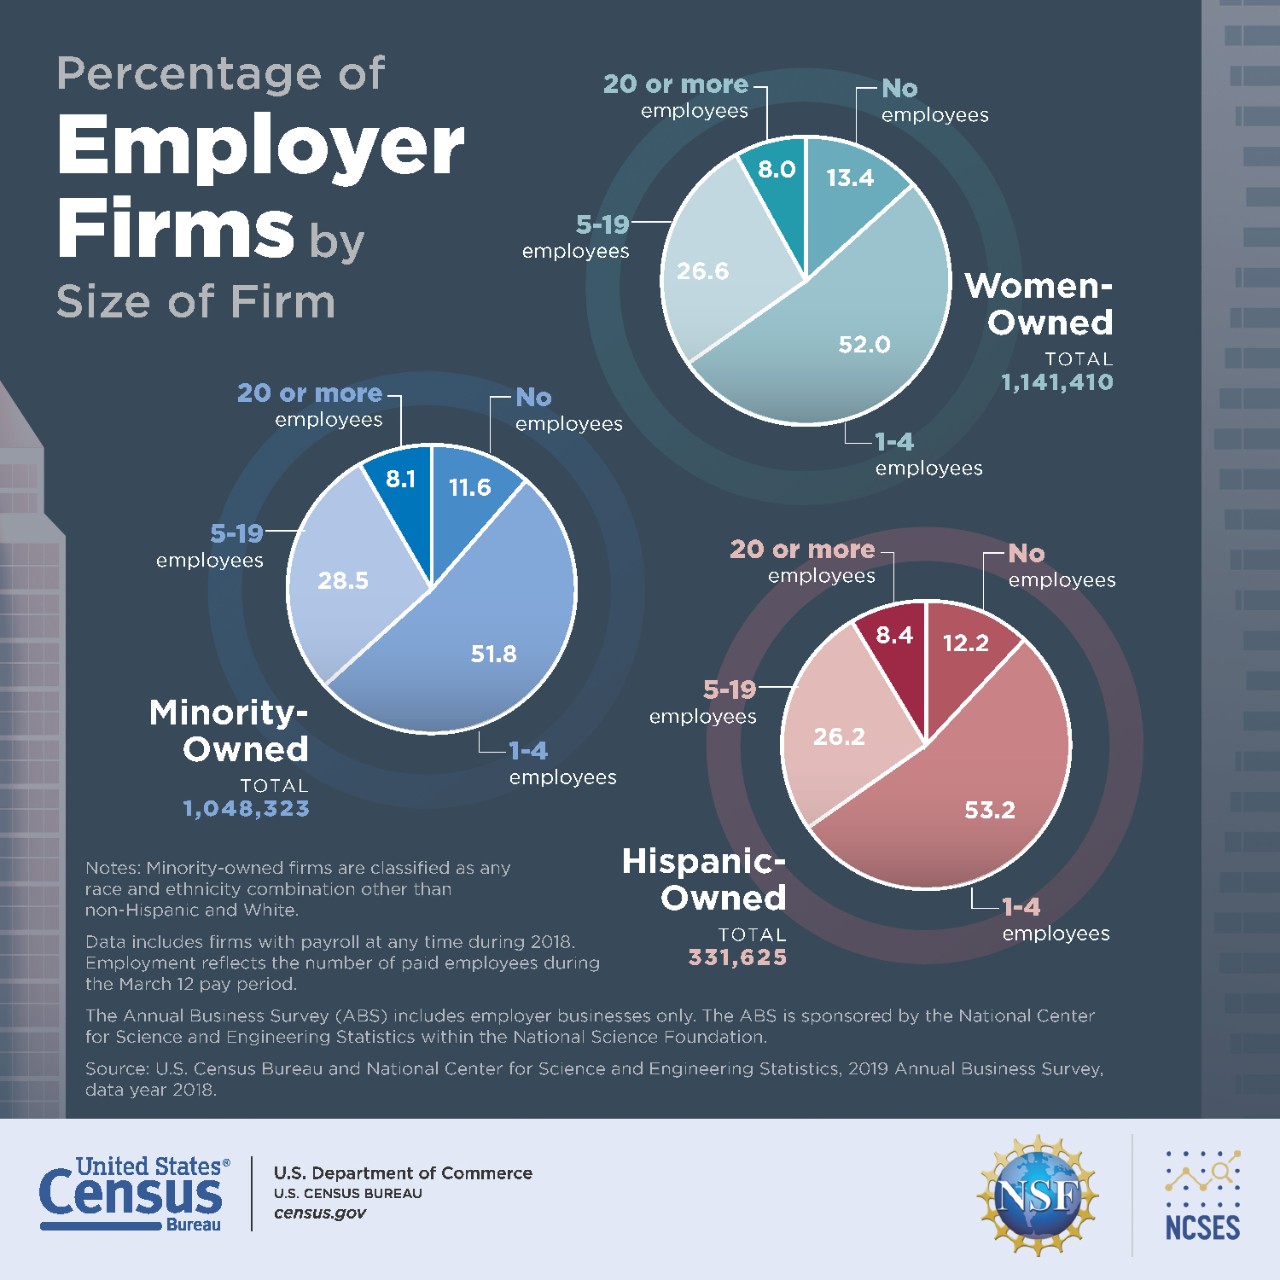 Three pie charts displaying the percentage of employer Firms by size of firm. Women-Owned chart shows the size of employer firms: 52% have 1-4 employees; 26.6% have 5-19; 8.0% have 20 or more; and 14.4% have none. Hispanic-Owned chart: 53.2% have 1-4 employees; 26.2% have 5-19; 8.4% have 20 or more; 12.2% have none. Minority-Owned chart: 51.8% have 1-4 employees; 28.5% have 5-19, 8.1% have 20 or more, 11.6% have none.